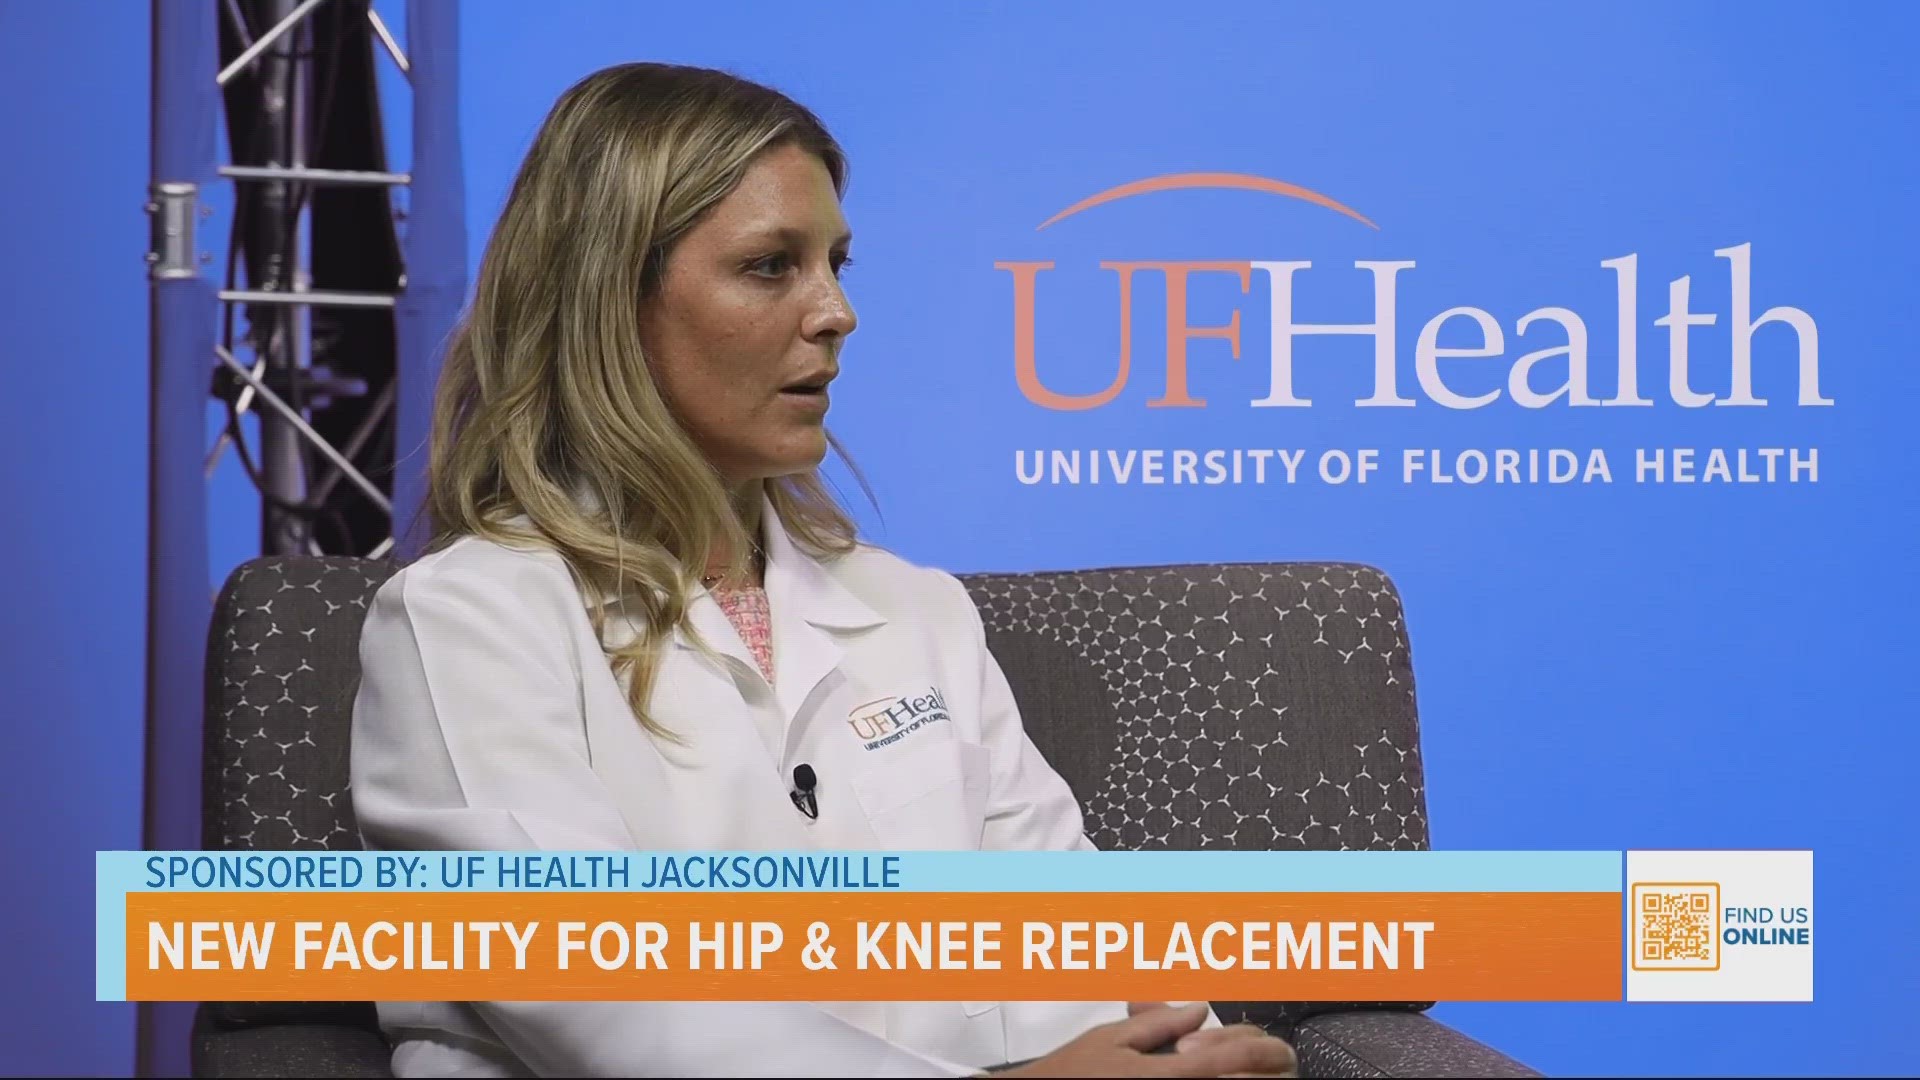 If you are interested in learning more, visit UFHealthJax.org!